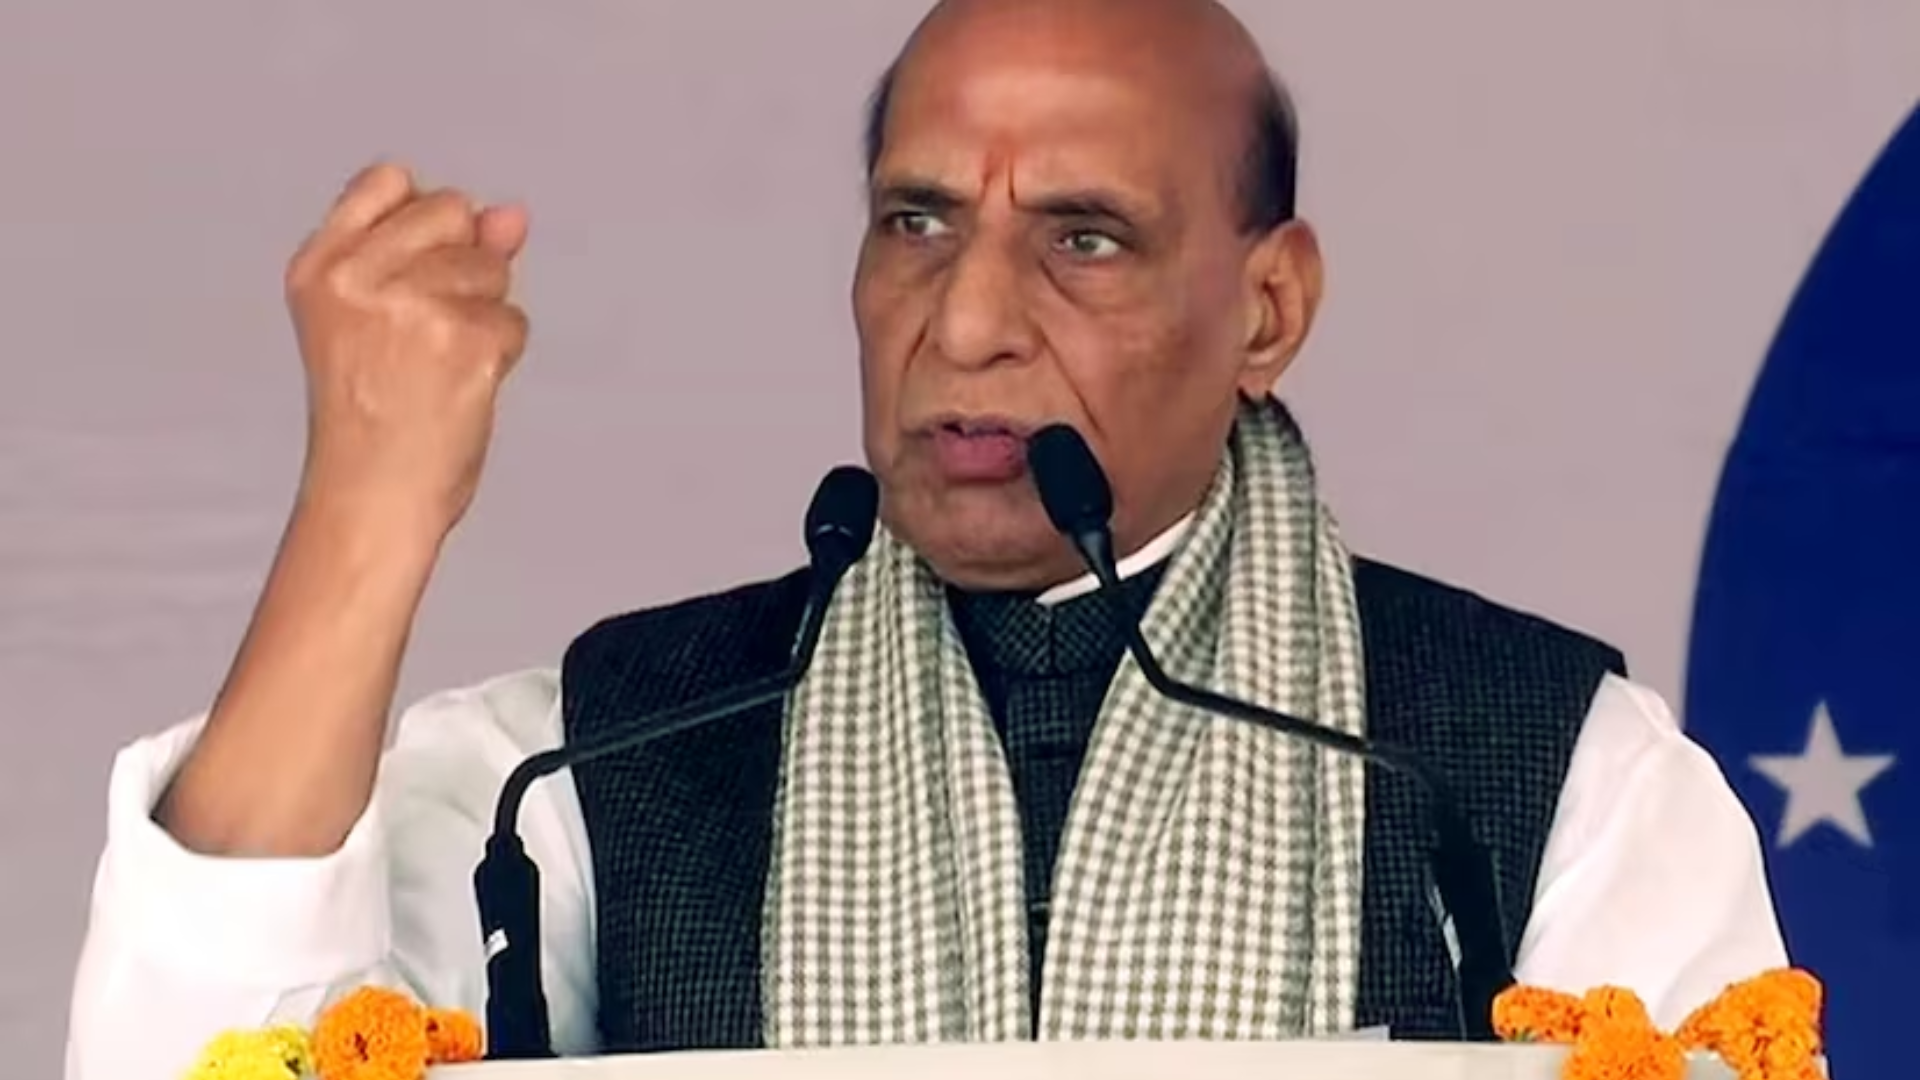 Rajnath Singh Gives A Stern Affirmation On Cross-Border Terrorism: “We Will Give Them ‘Muh Tod Jawab'”